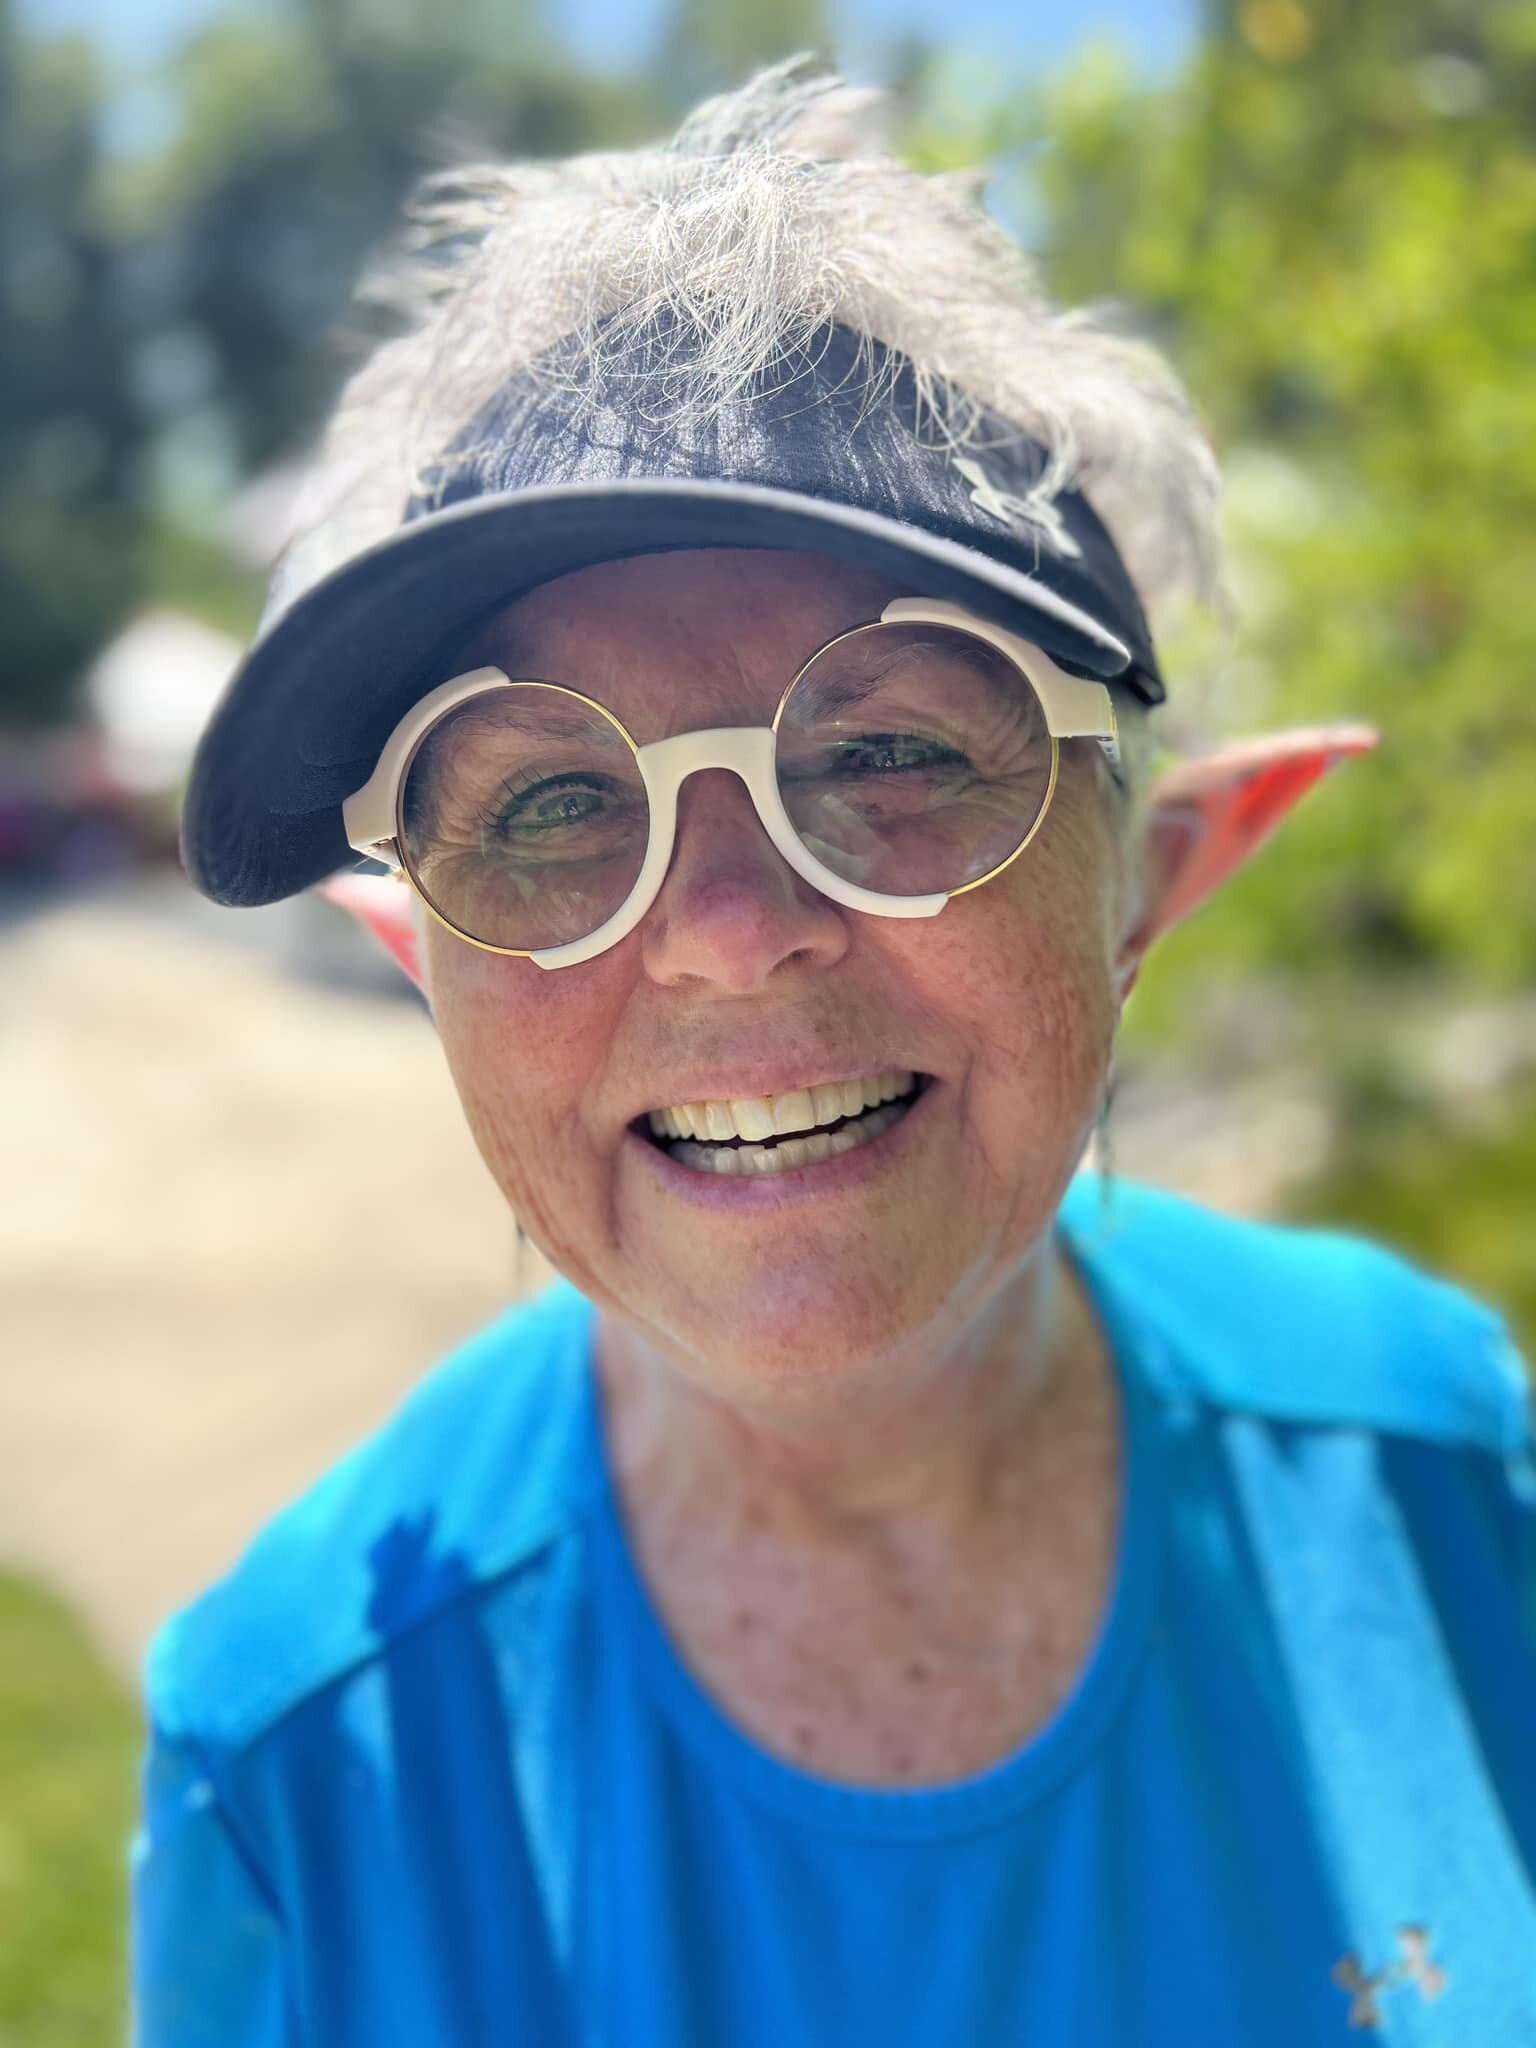 Susan Peck don't take off those ears. I'm pretty sure that's your best look yet. I really do think it shows your true colors! 🥳

Glad you taught me to be wild and free. Also glad I didn't inherit those ears though...🧐

Love you mom. 😍

Grateful to